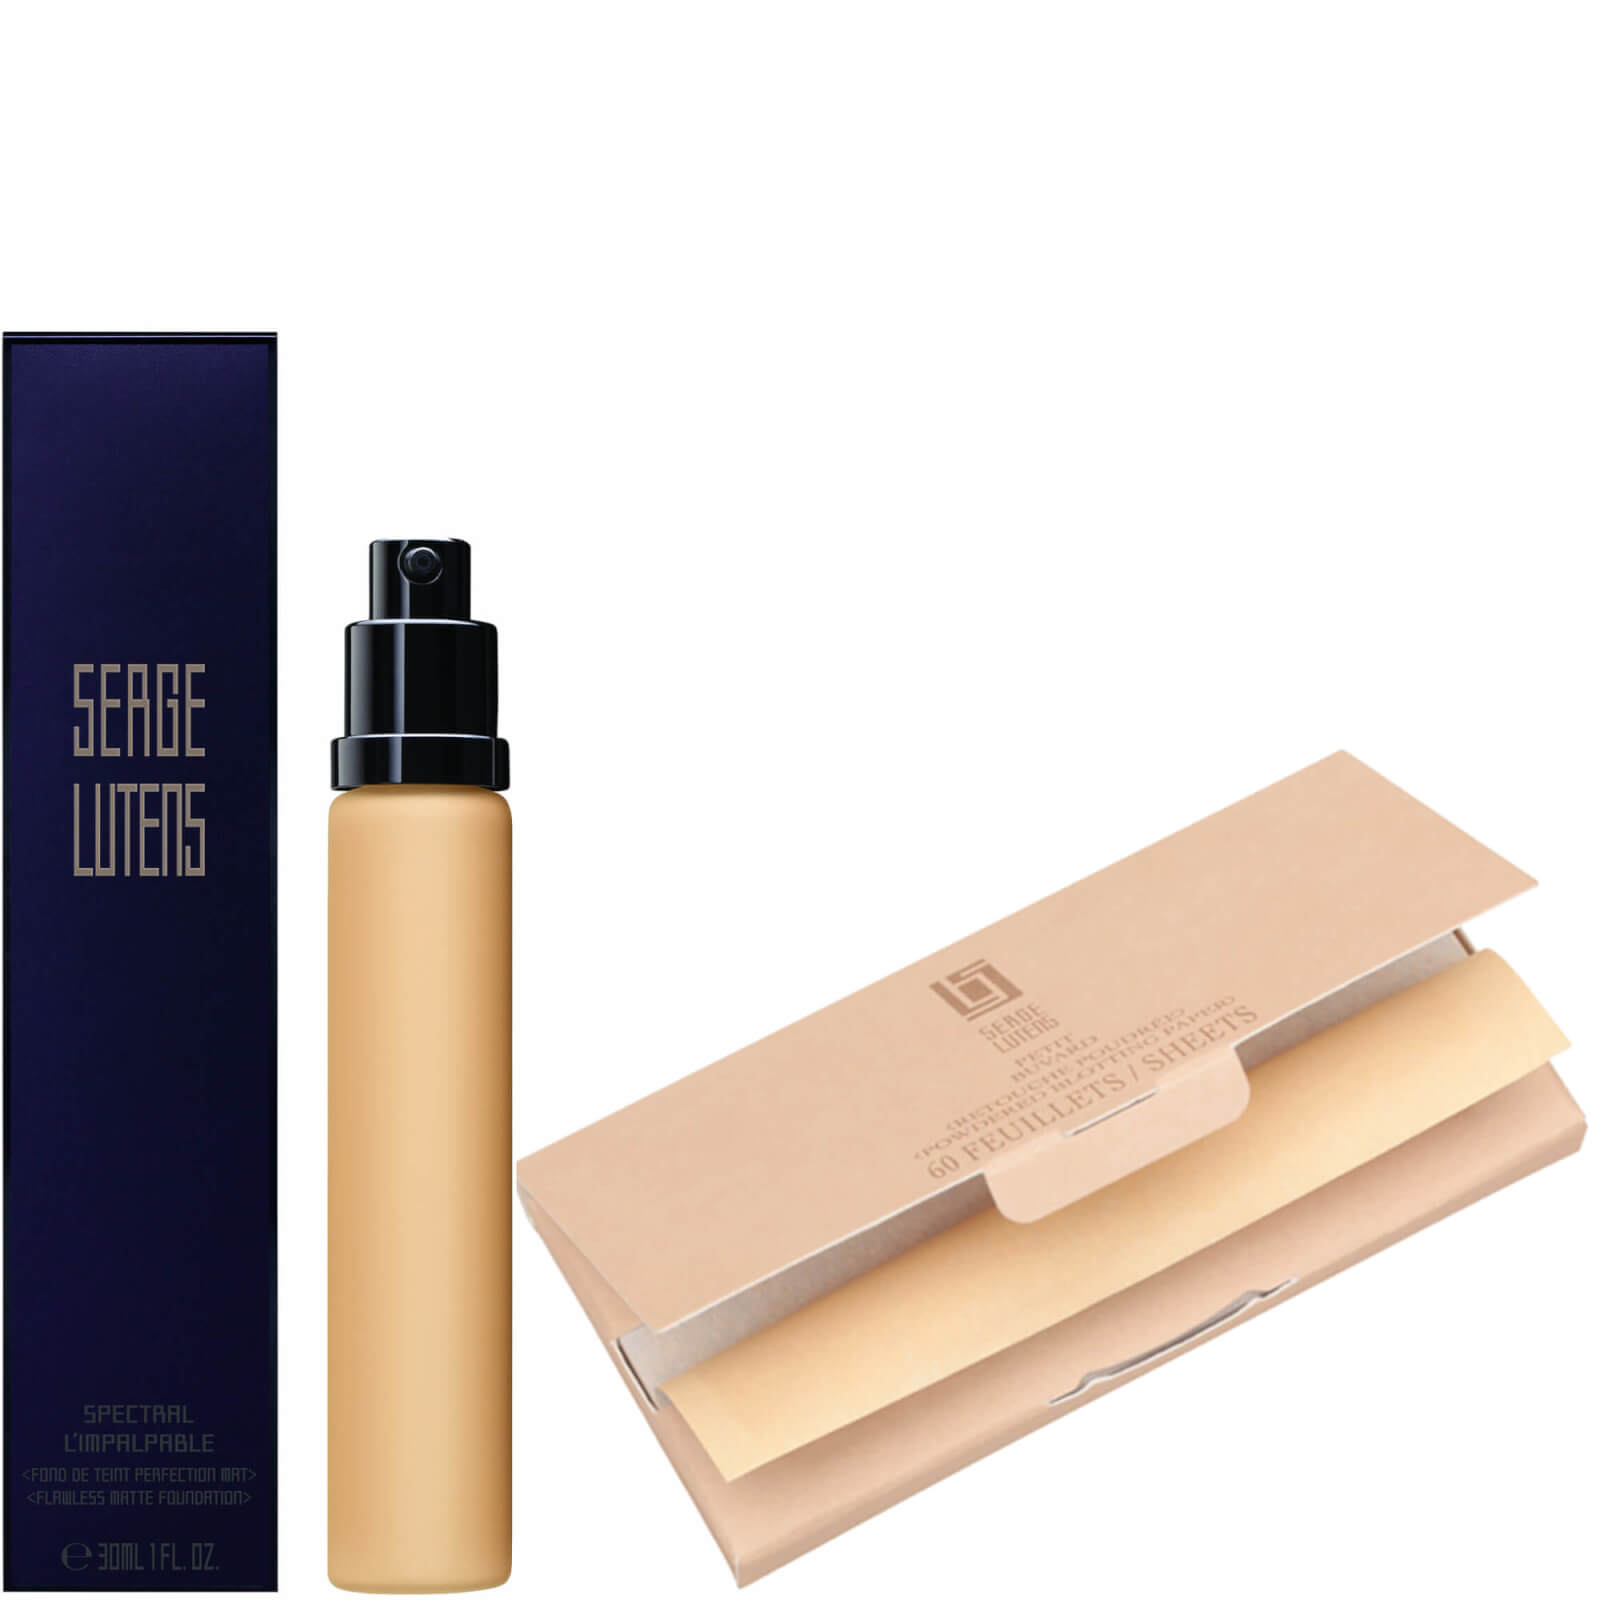 Serge Lutens Petit Buvard Matifying Paper and Spectral Fluid Foundation Refill 30ml Bundle (Various Shades) - G20